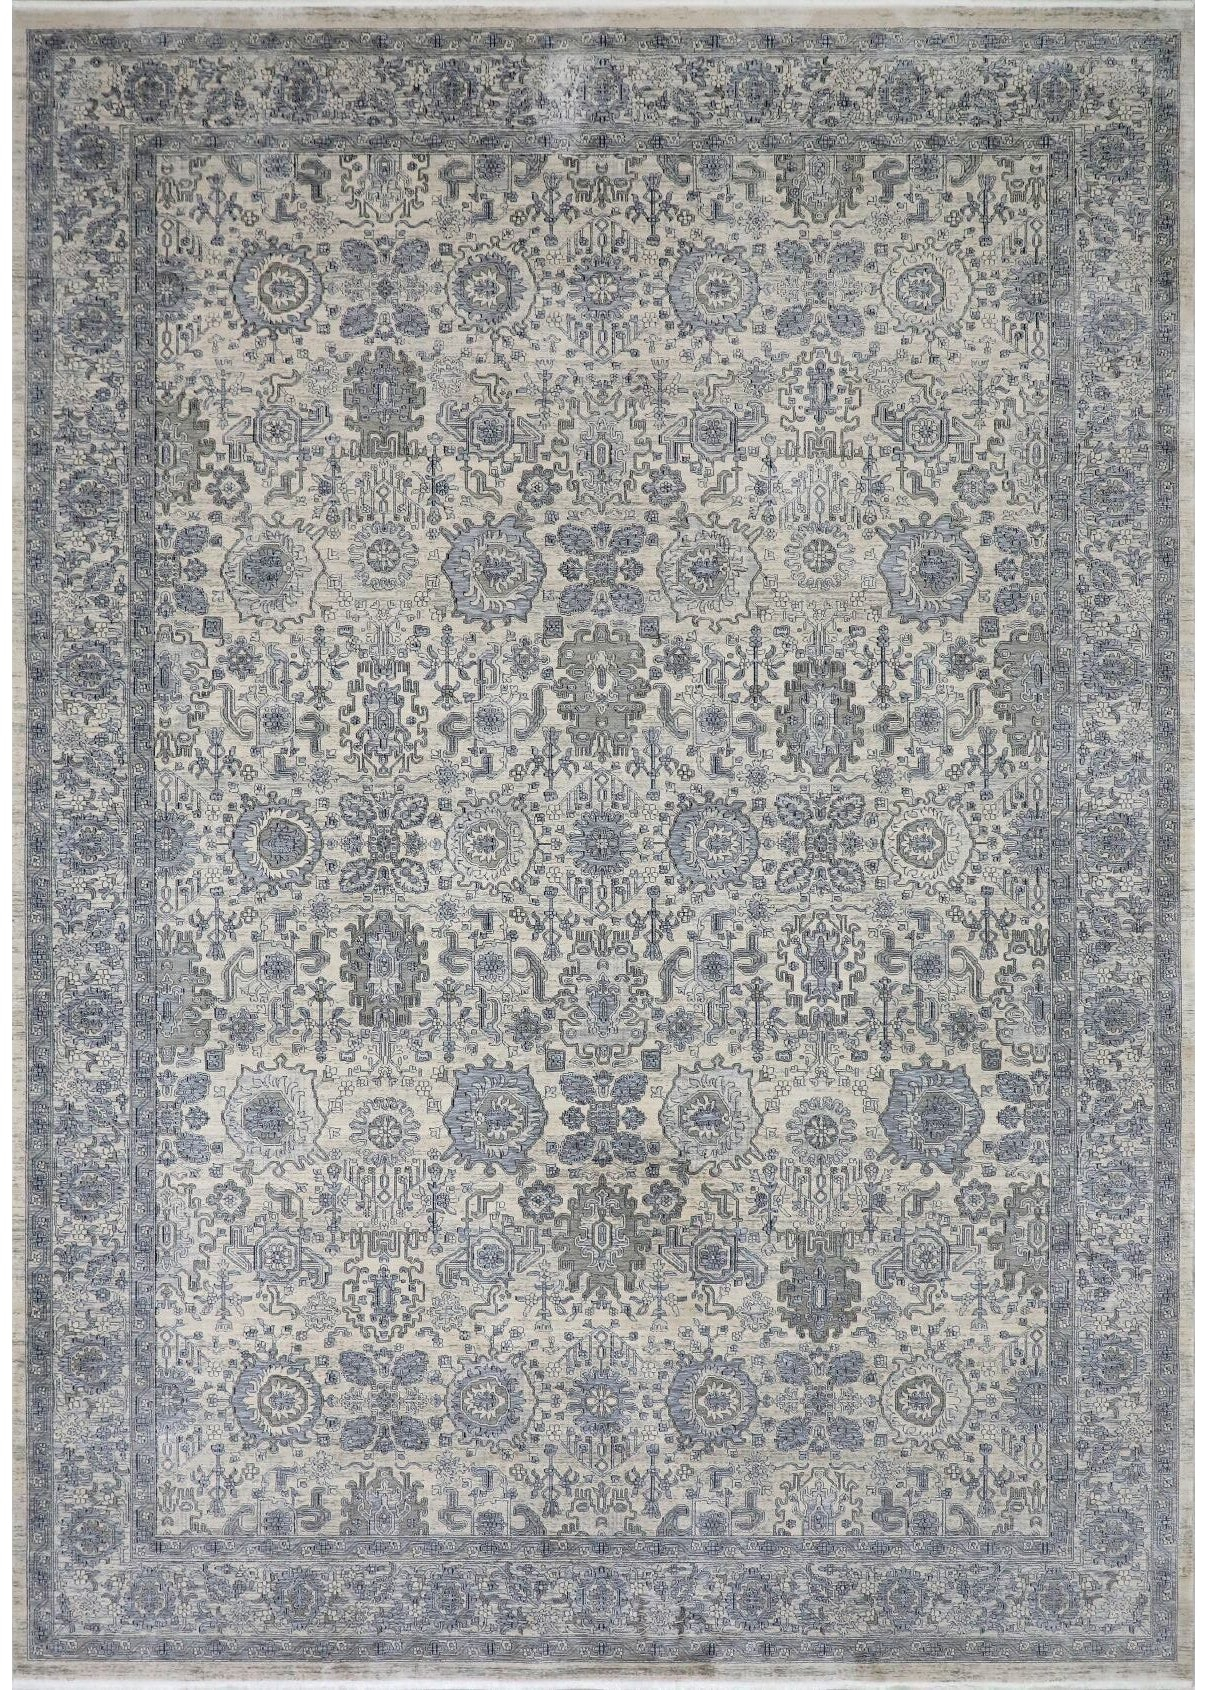 Rover Portobello Woven Rug-Area rug for living room, dining area, and bedroom